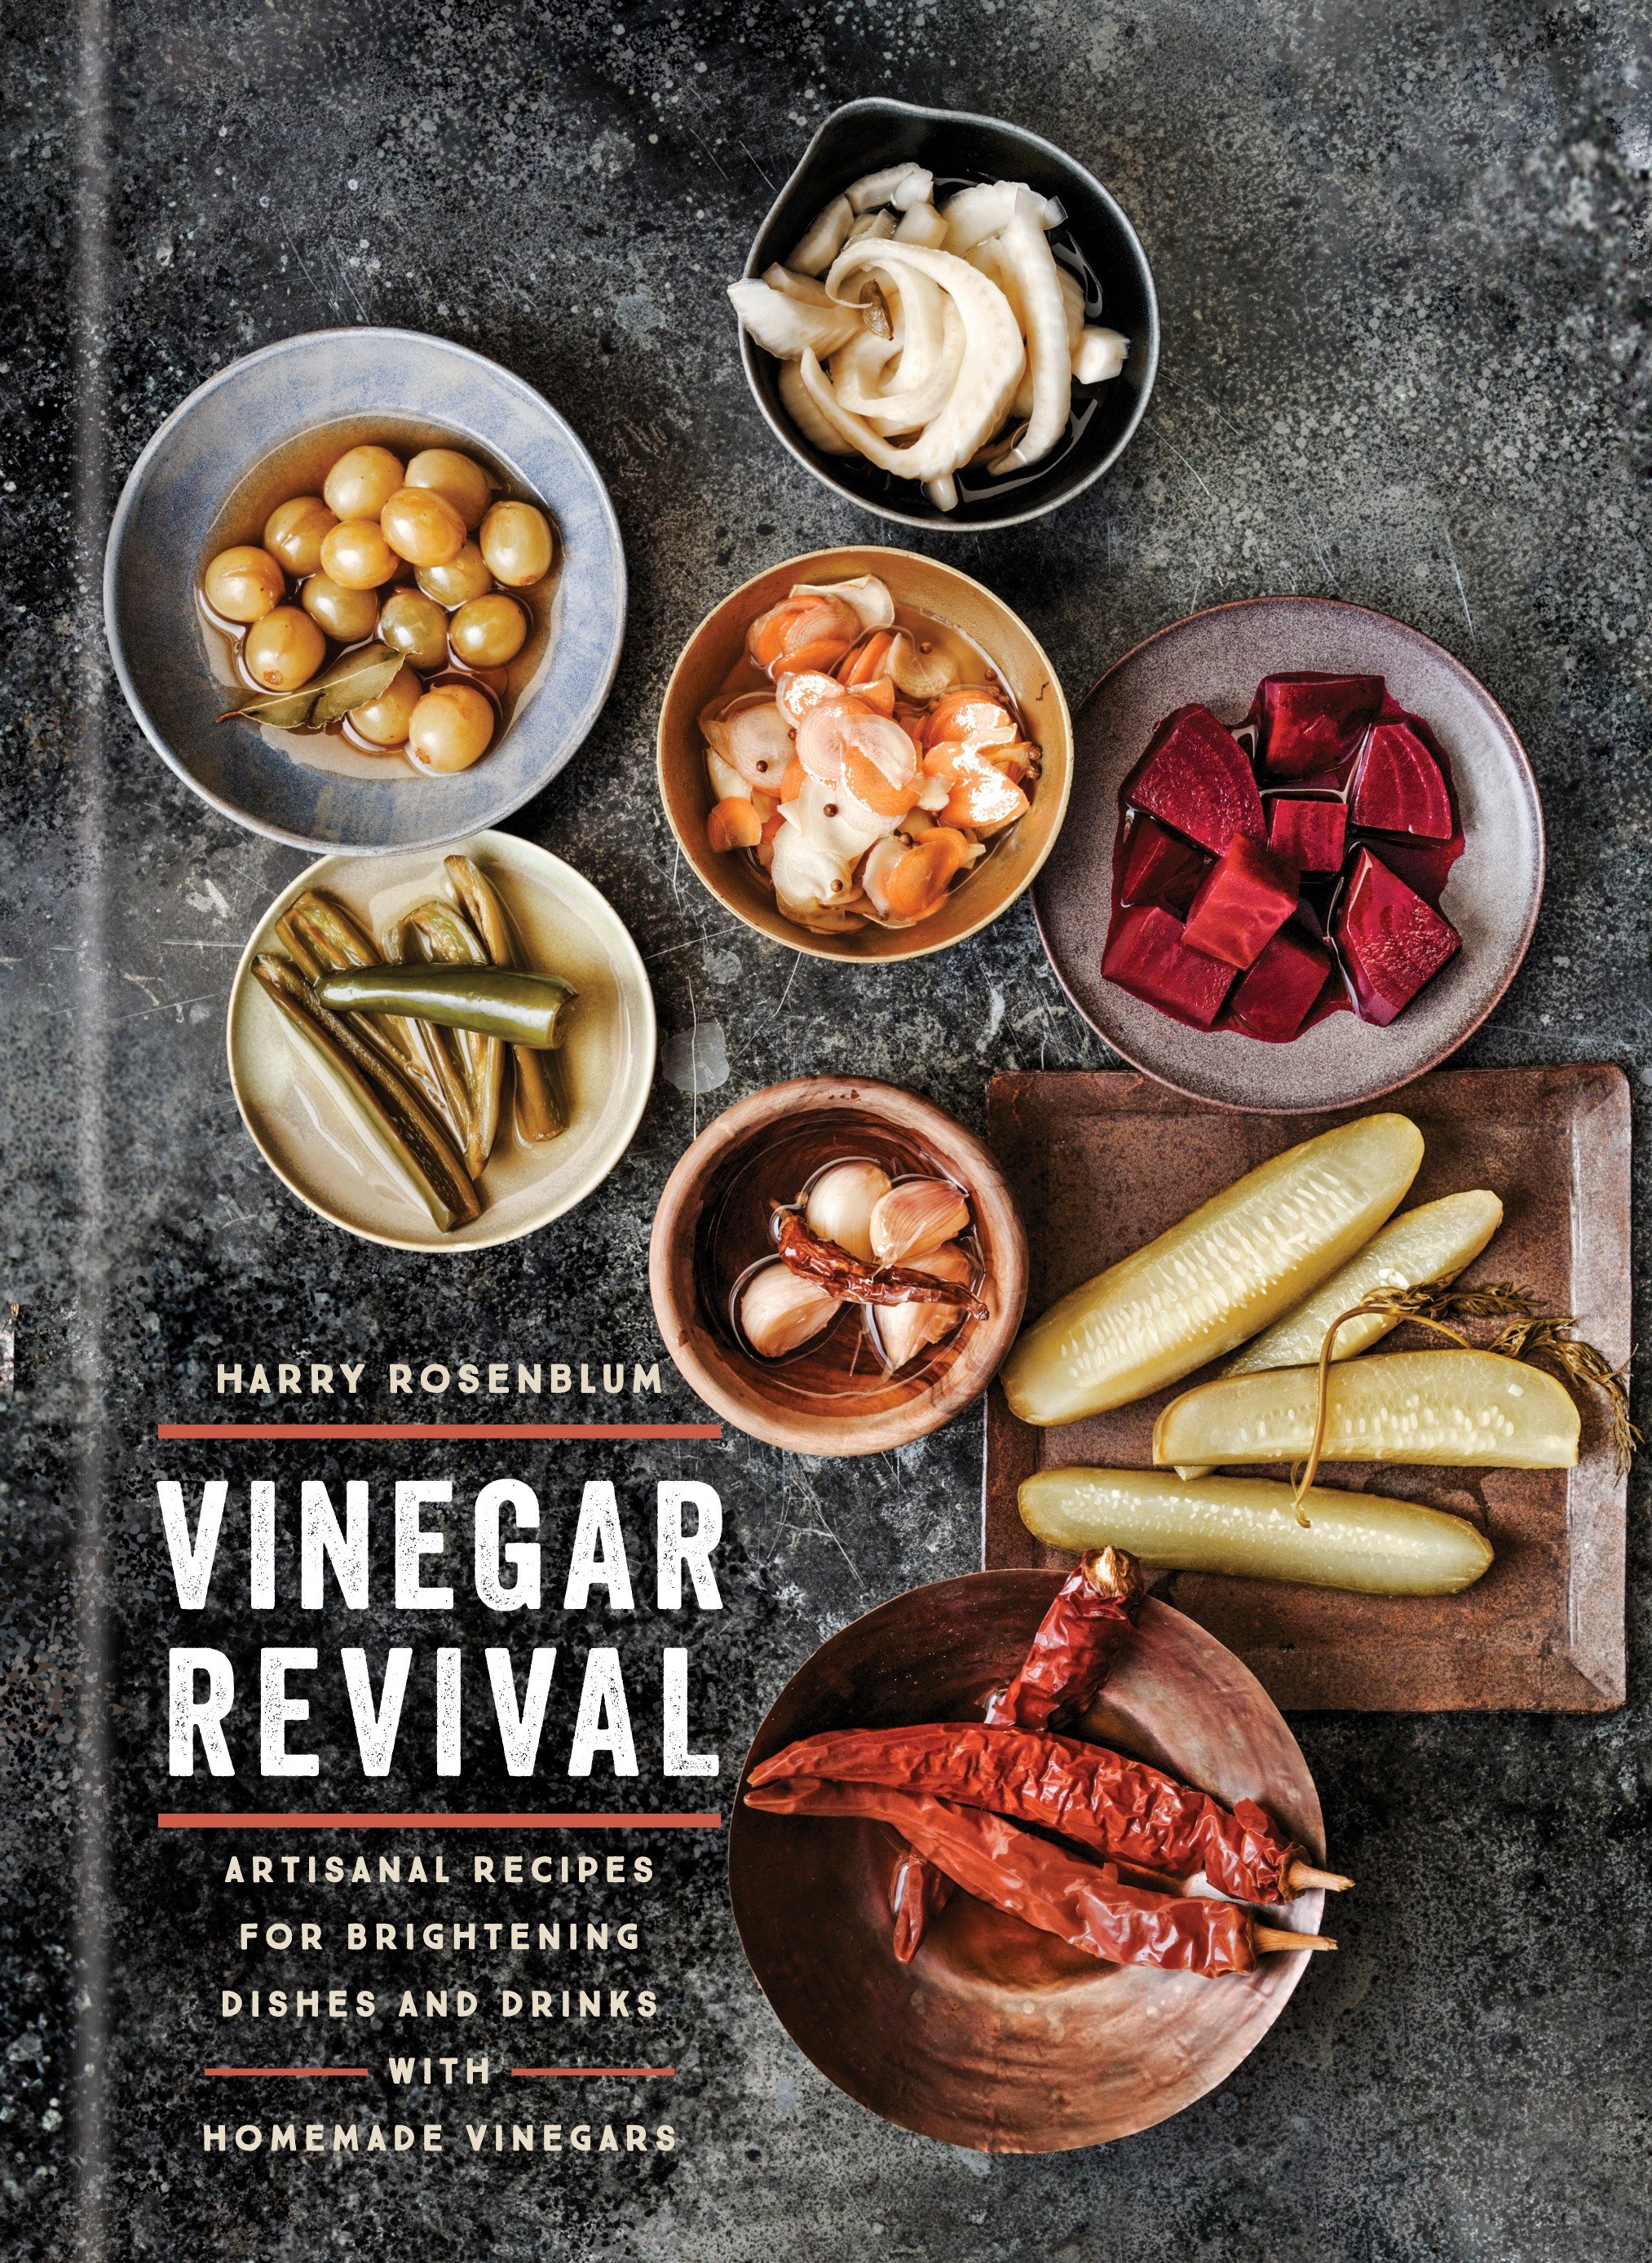 Vinegar revival recipes for brightening dishes and drinks with homemade vinegars cover image